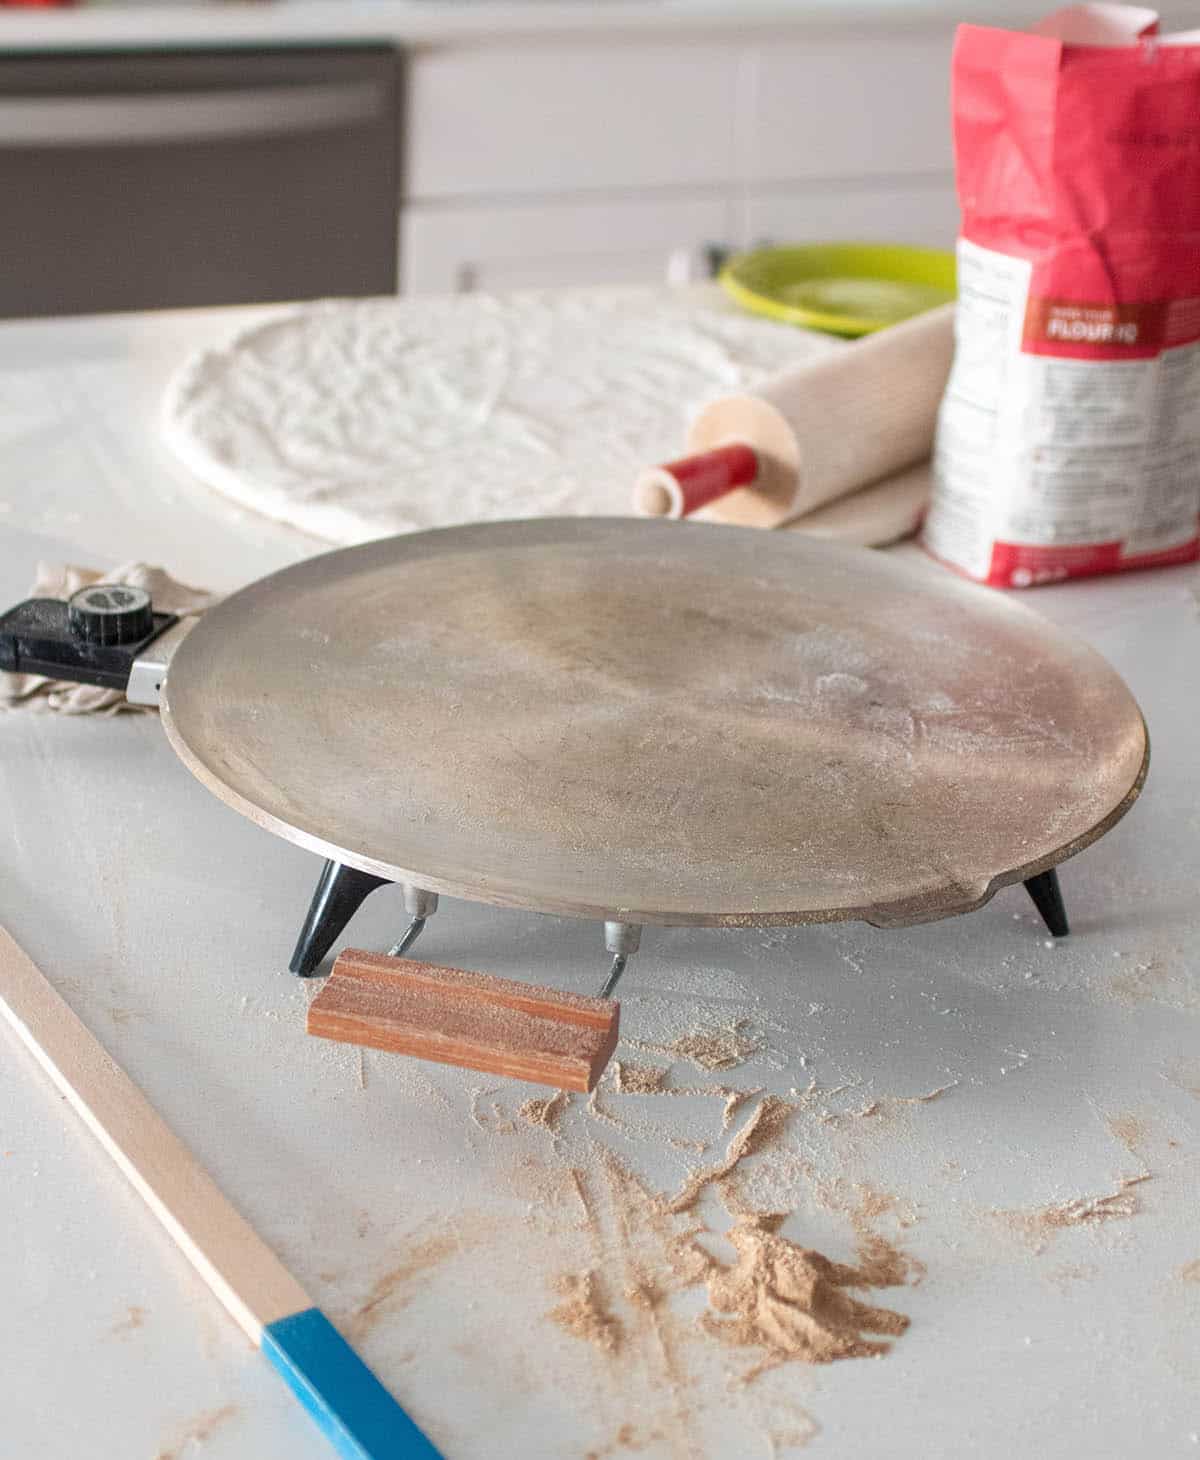 Lefse workstation with a griddle, rolling pin, turning stick, and a bag of flour.